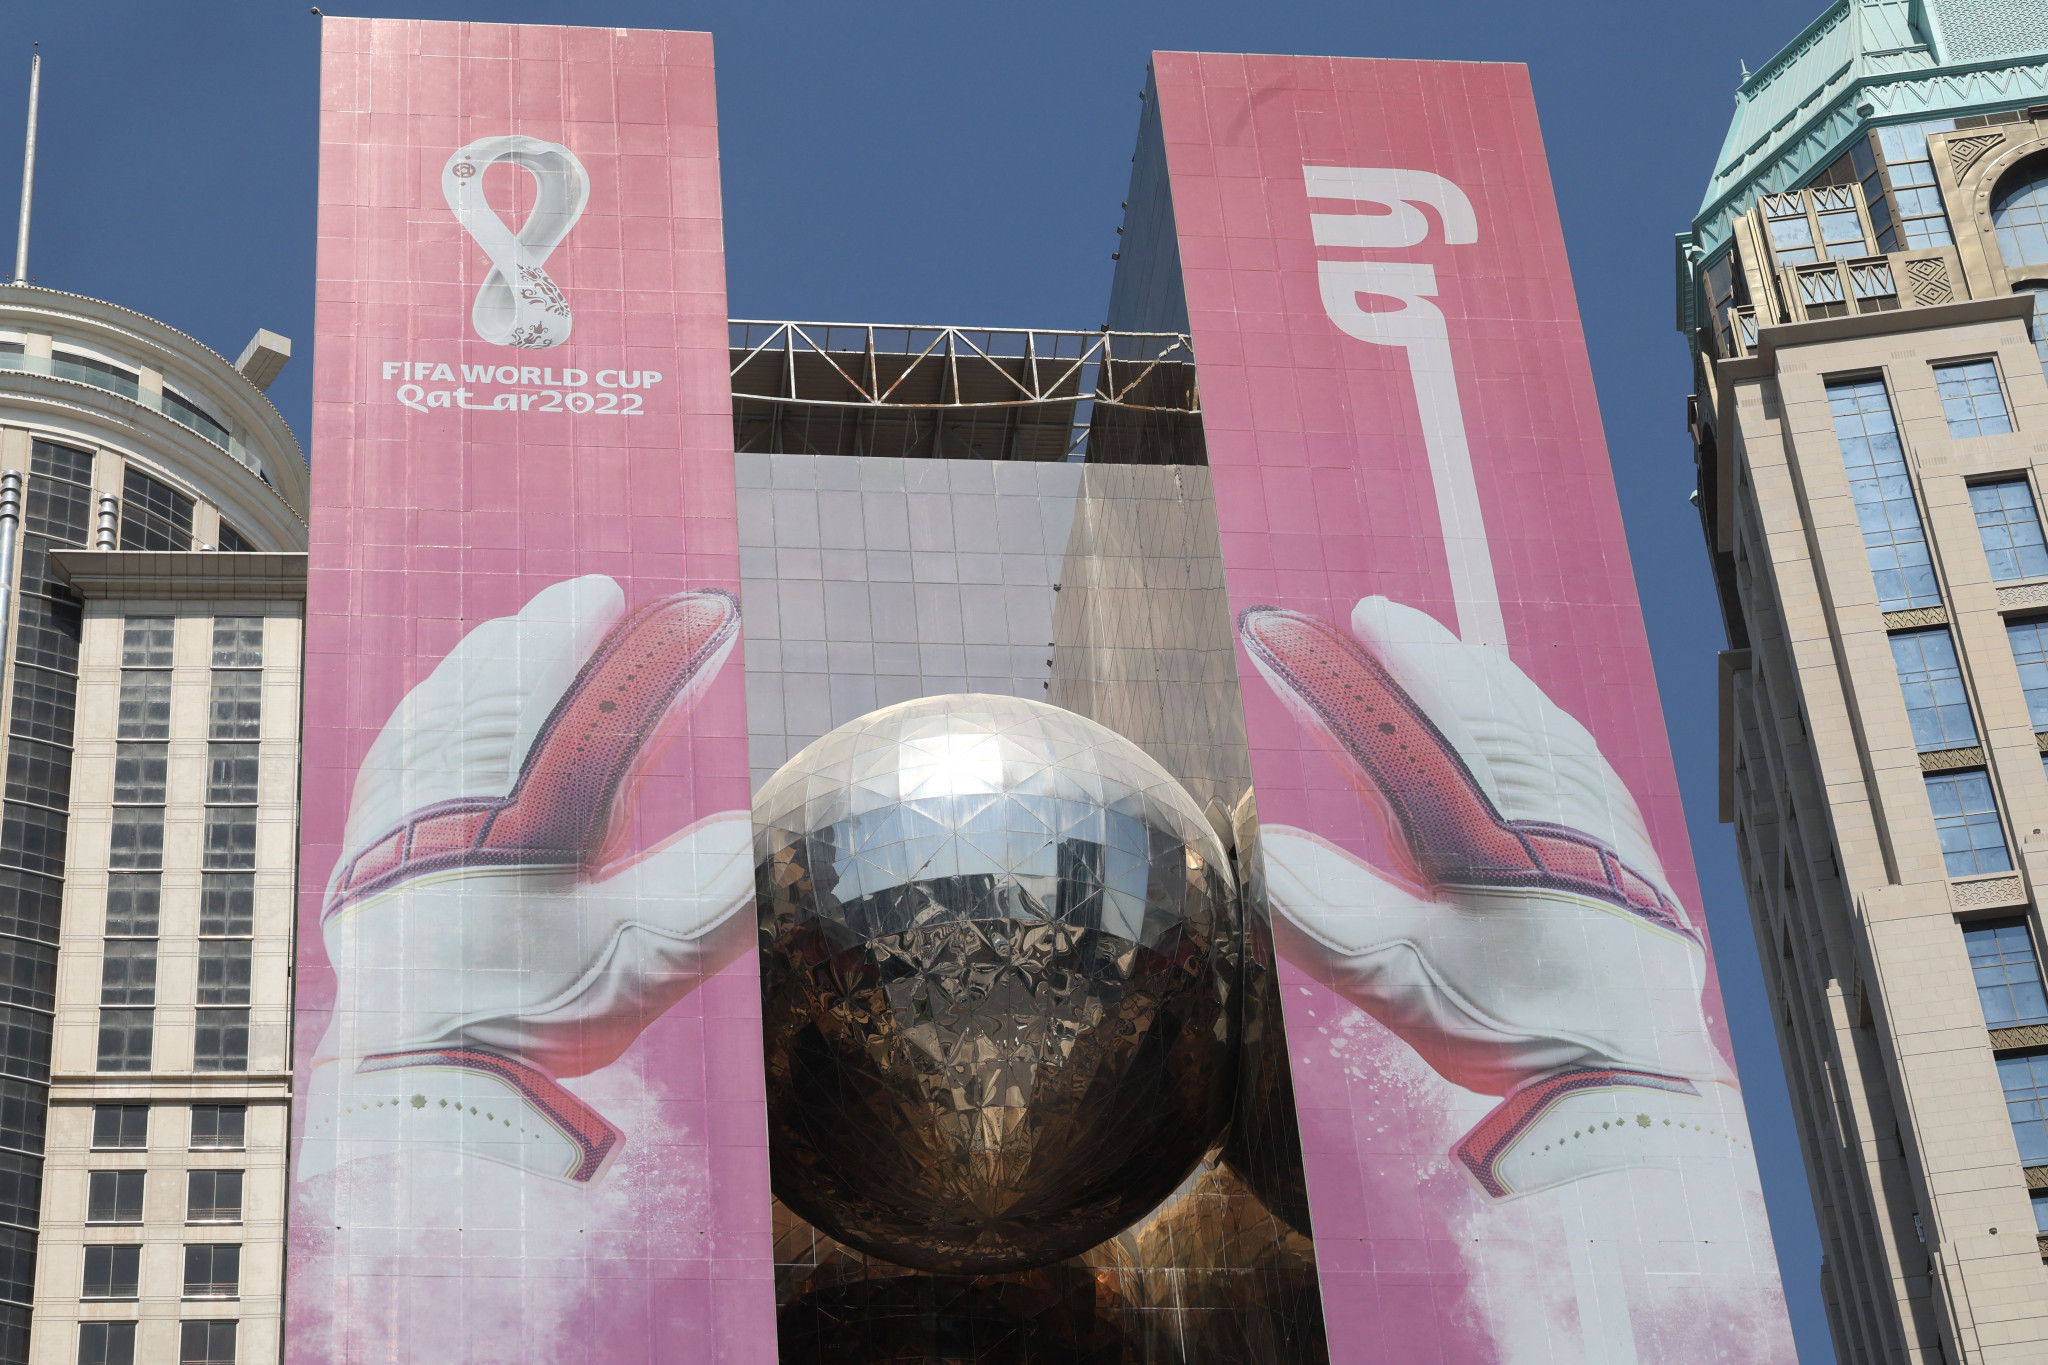 The FIFA World Cup is set to take place in Qatar later this month ©Getty Images